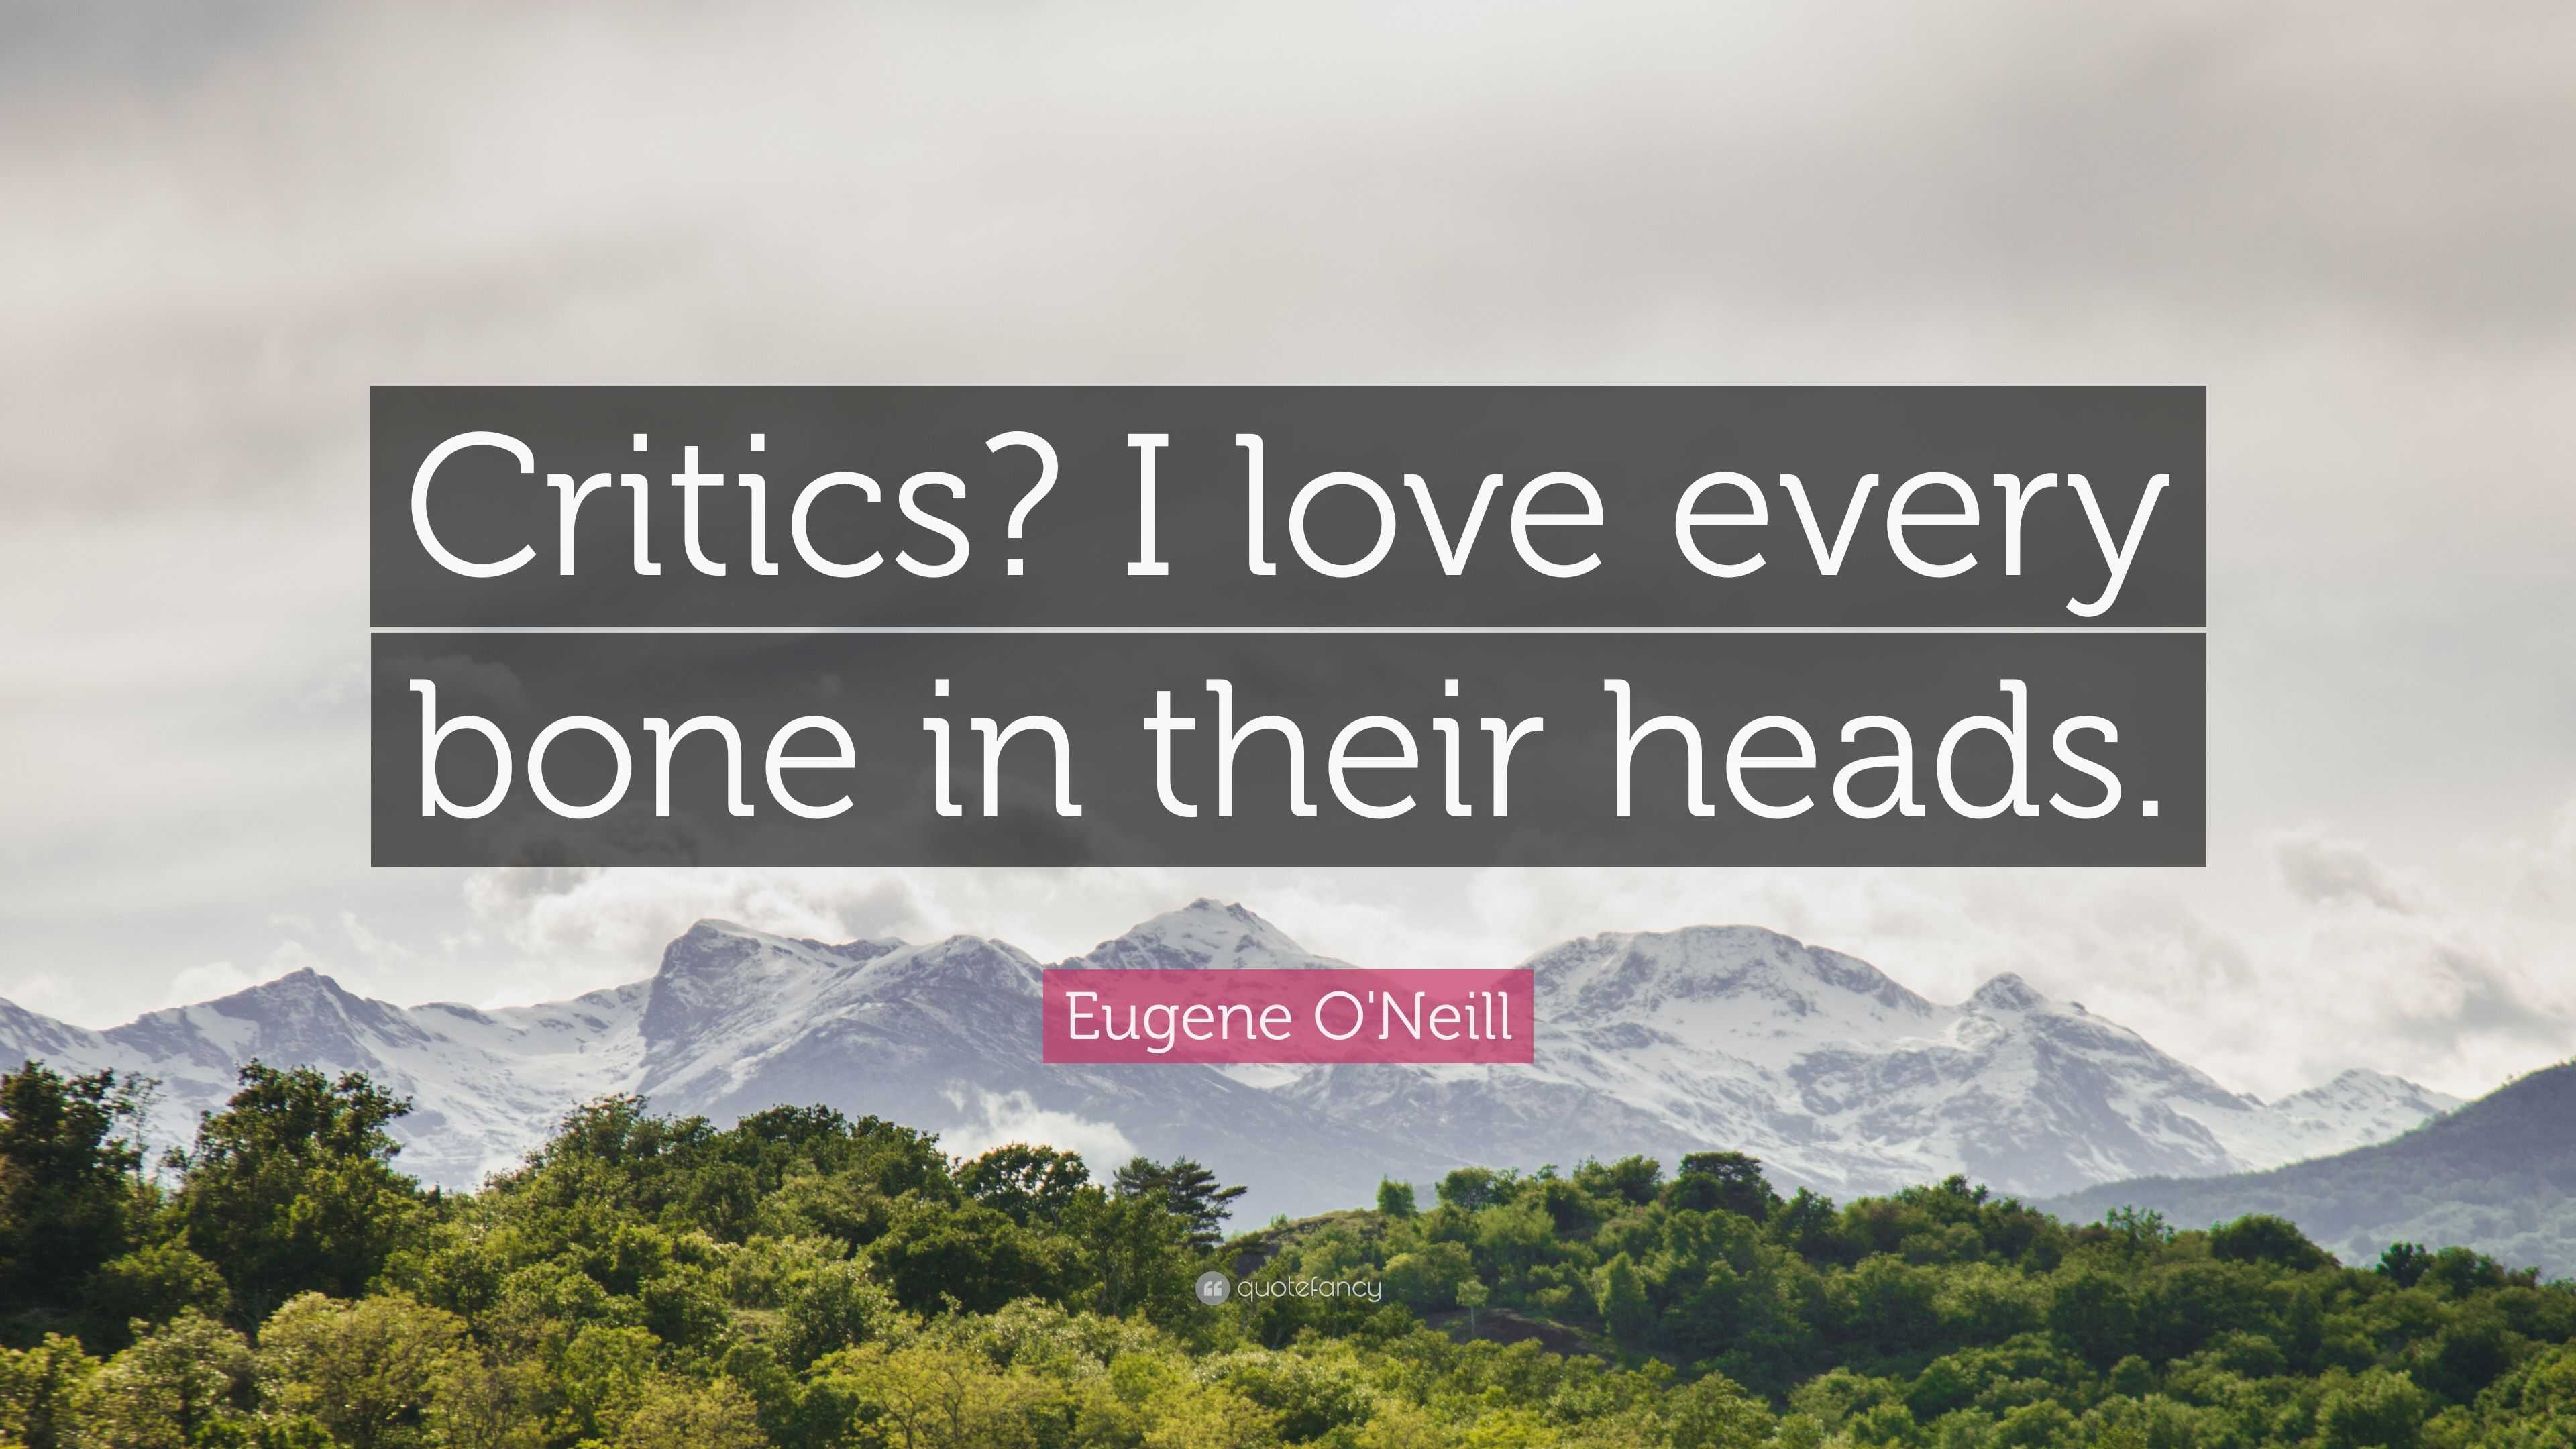 https://quotefancy.com/media/wallpaper/3840x2160/5999293-Eugene-O-Neill-Quote-Critics-I-love-every-bone-in-their-heads.jpg